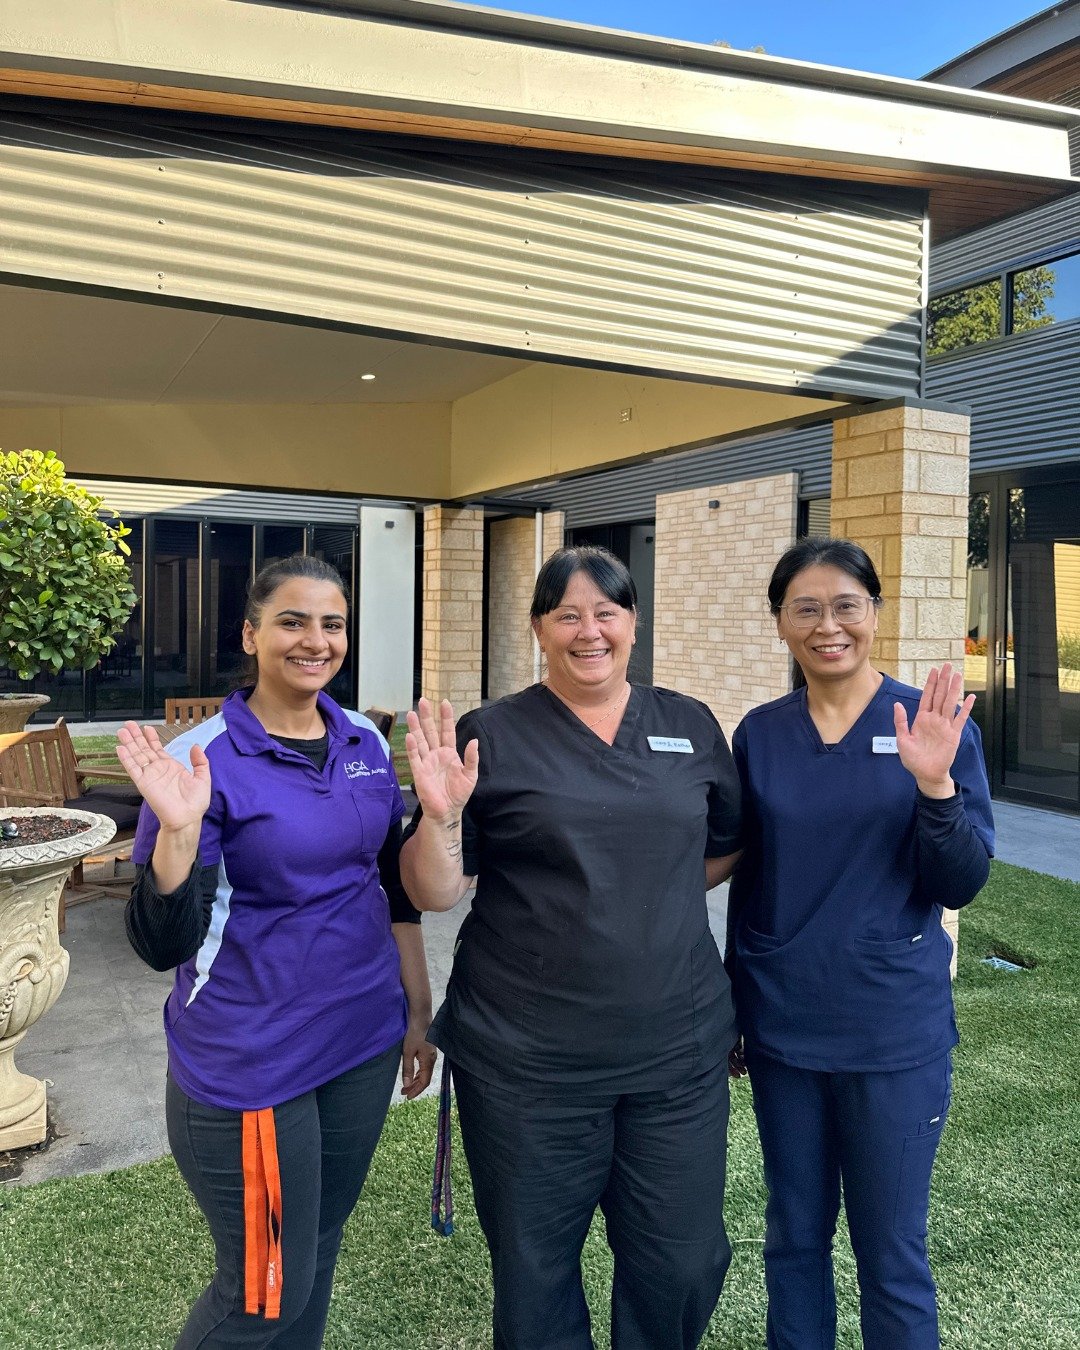 𝗜𝗻𝘁𝗲𝗿𝗻𝗮𝘁𝗶𝗼𝗻𝗮𝗹 𝗡𝘂𝗿𝘀𝗲𝘀 𝗗𝗮𝘆 🩺🤍

Today we celebrate our incredible nurses at ONCALL. Say hey to some of the dedicated team from our Supported Accommodation in Adelaide, South Australia!

A heartfelt thank you to all the remarkable